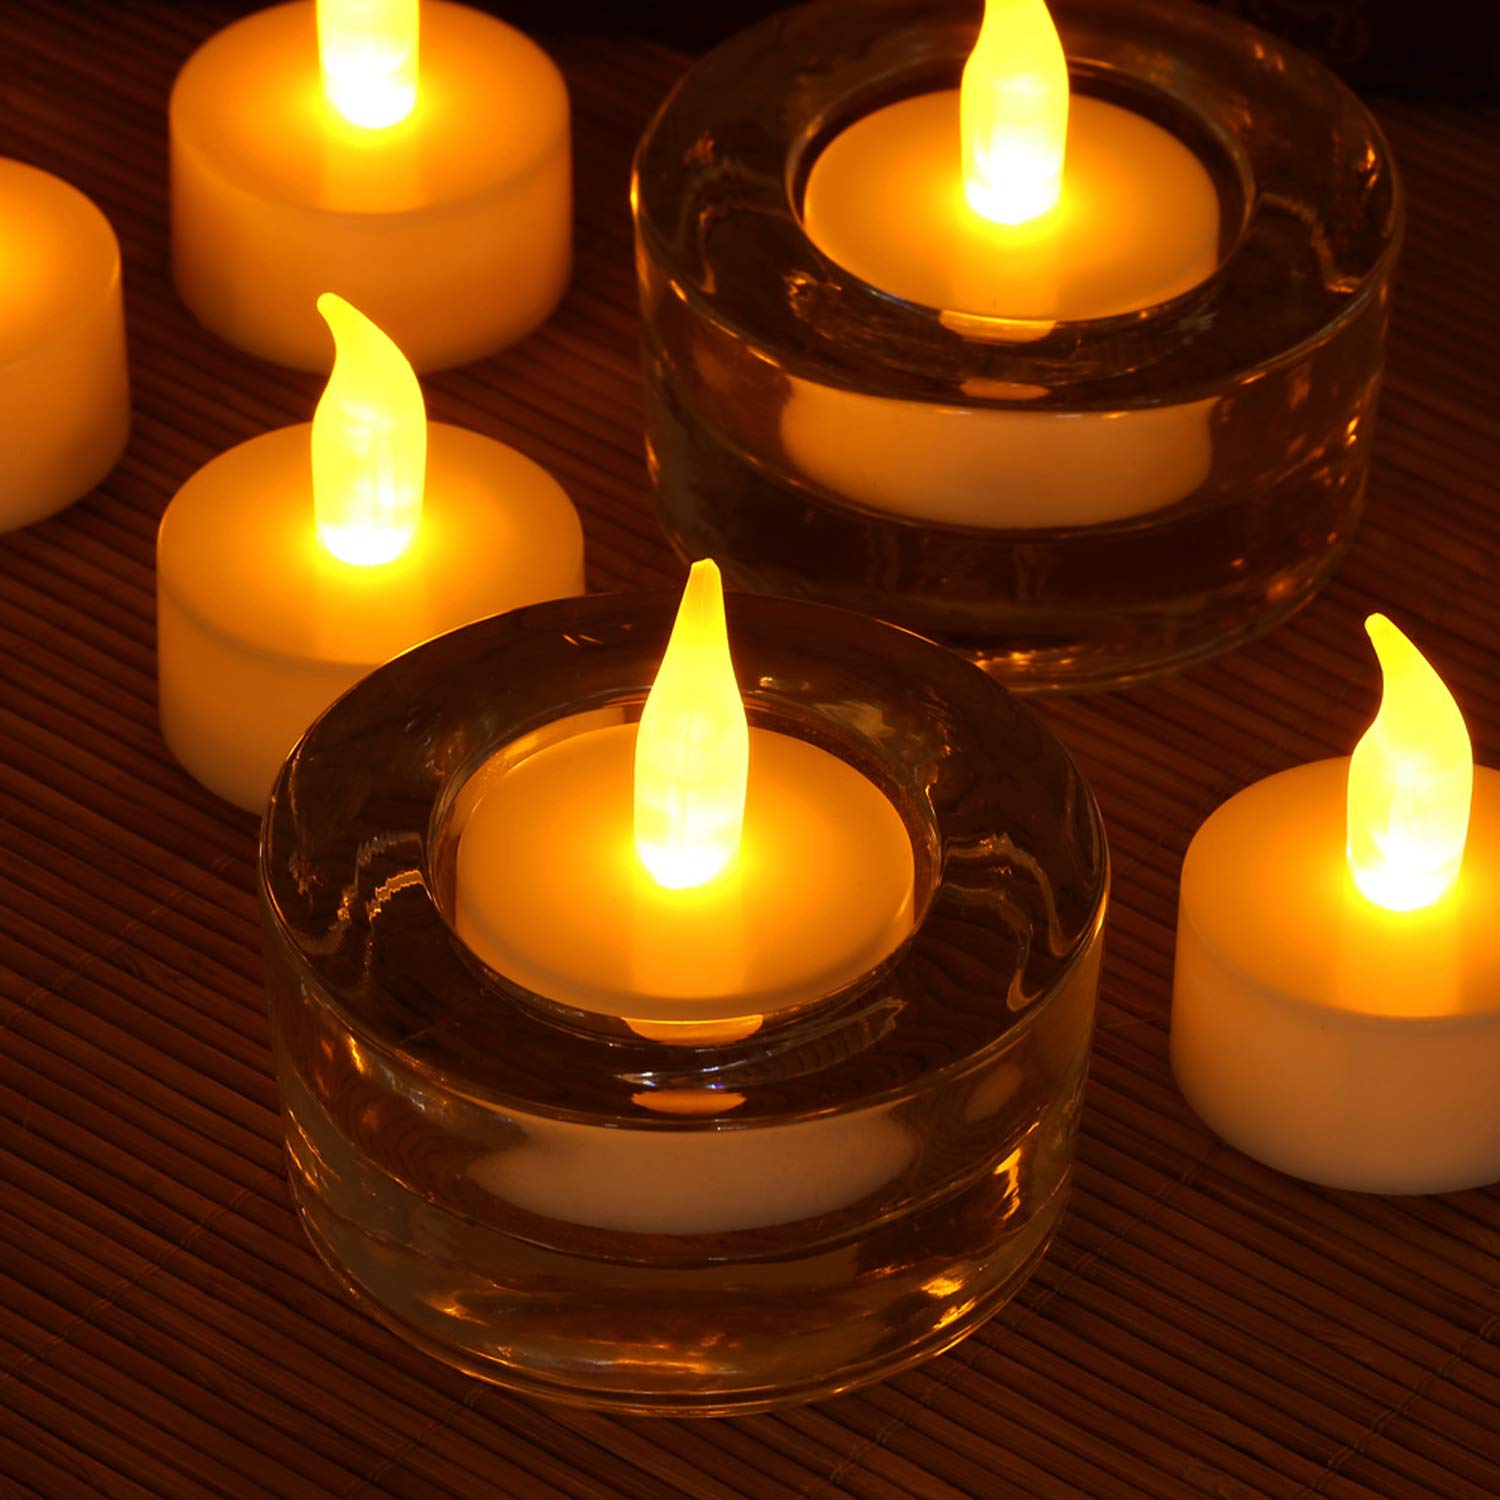 Novelty Place 24 Pcs Flameless LED Tea Light Candles Flickering Tealights Electric Battery-Powered - image 5 of 7